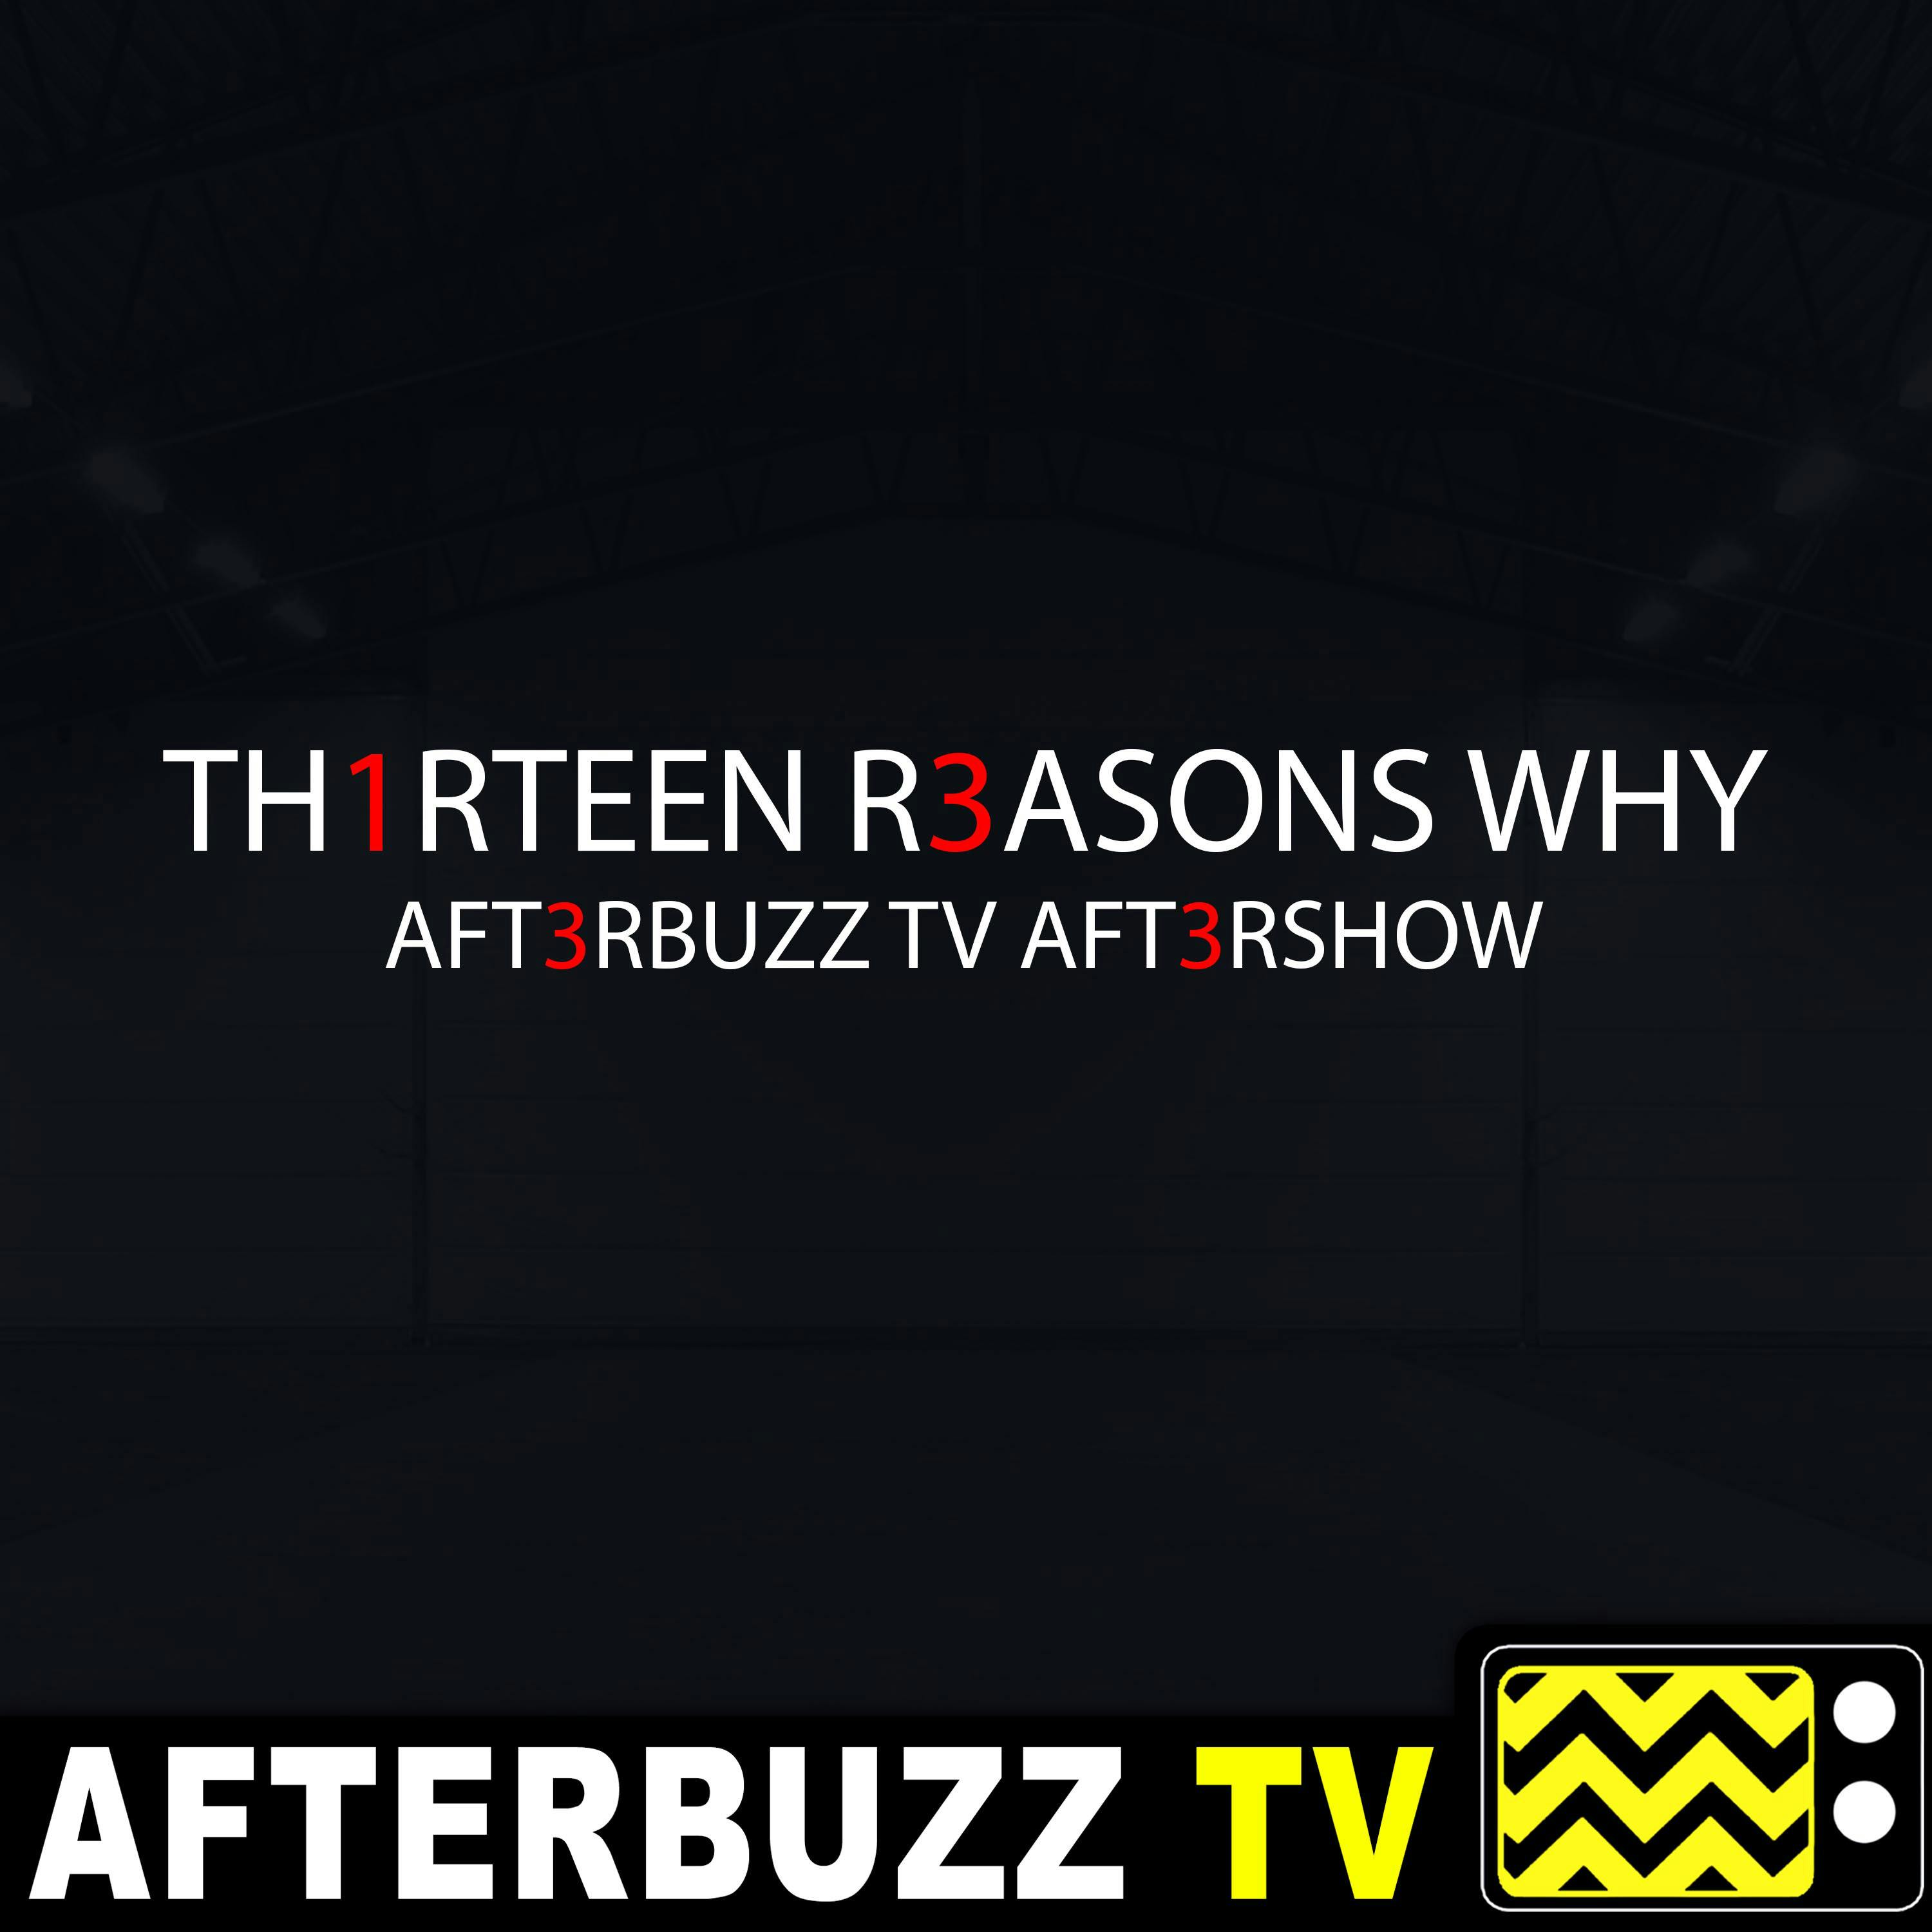 “In High School, Even on a Good Day, It’s Hard to Tell Who’s on Your Side” Season 3 Episode 8 '13 Reasons Why' Review